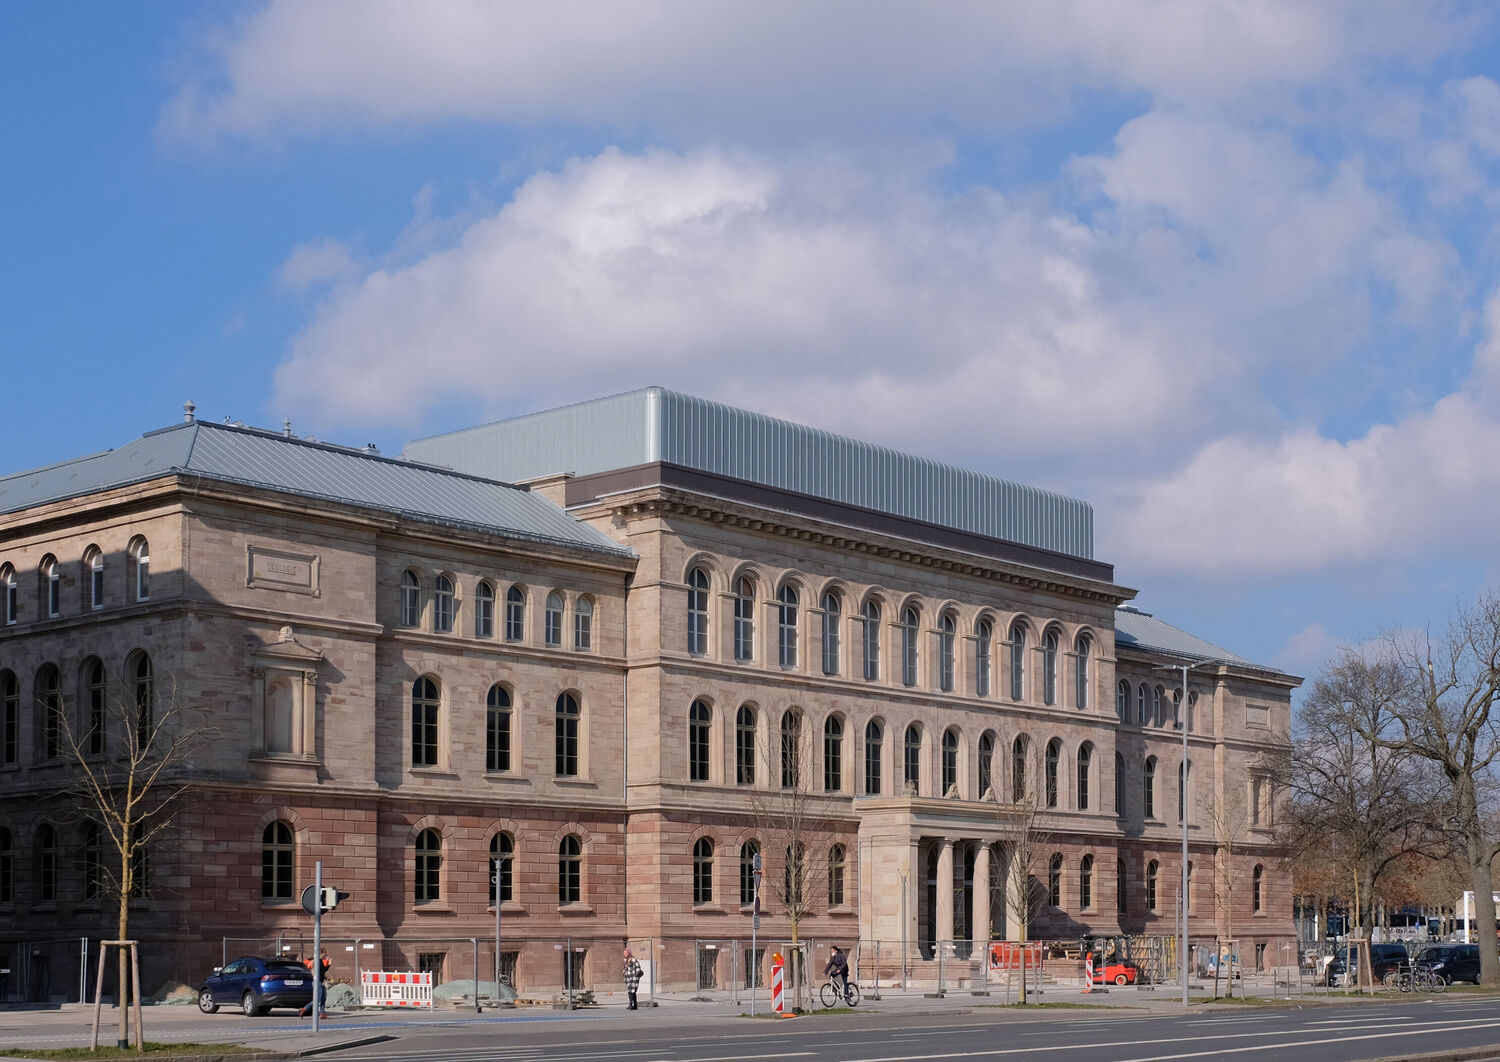 Göttingen University's Forum Wissen will open its doors to the public for the first time on 4 and 5 June 2022. The knowledge museum is housed in the former zoology building at Berliner Straße 28 and is open Tuesdays to Sundays from 10:00 to 18:00. Admission is free.